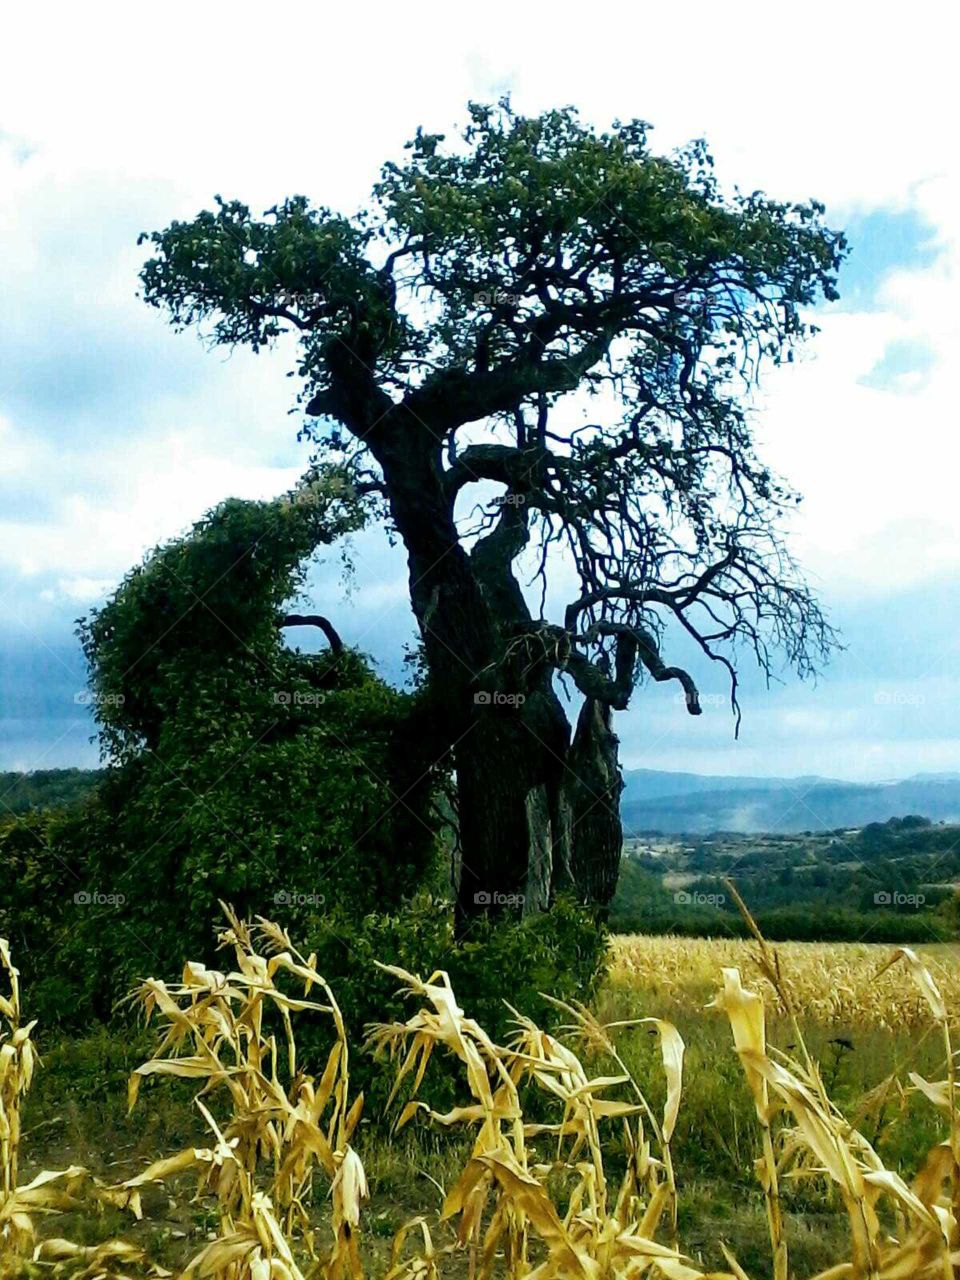 A one hundred years old tree in Serbia